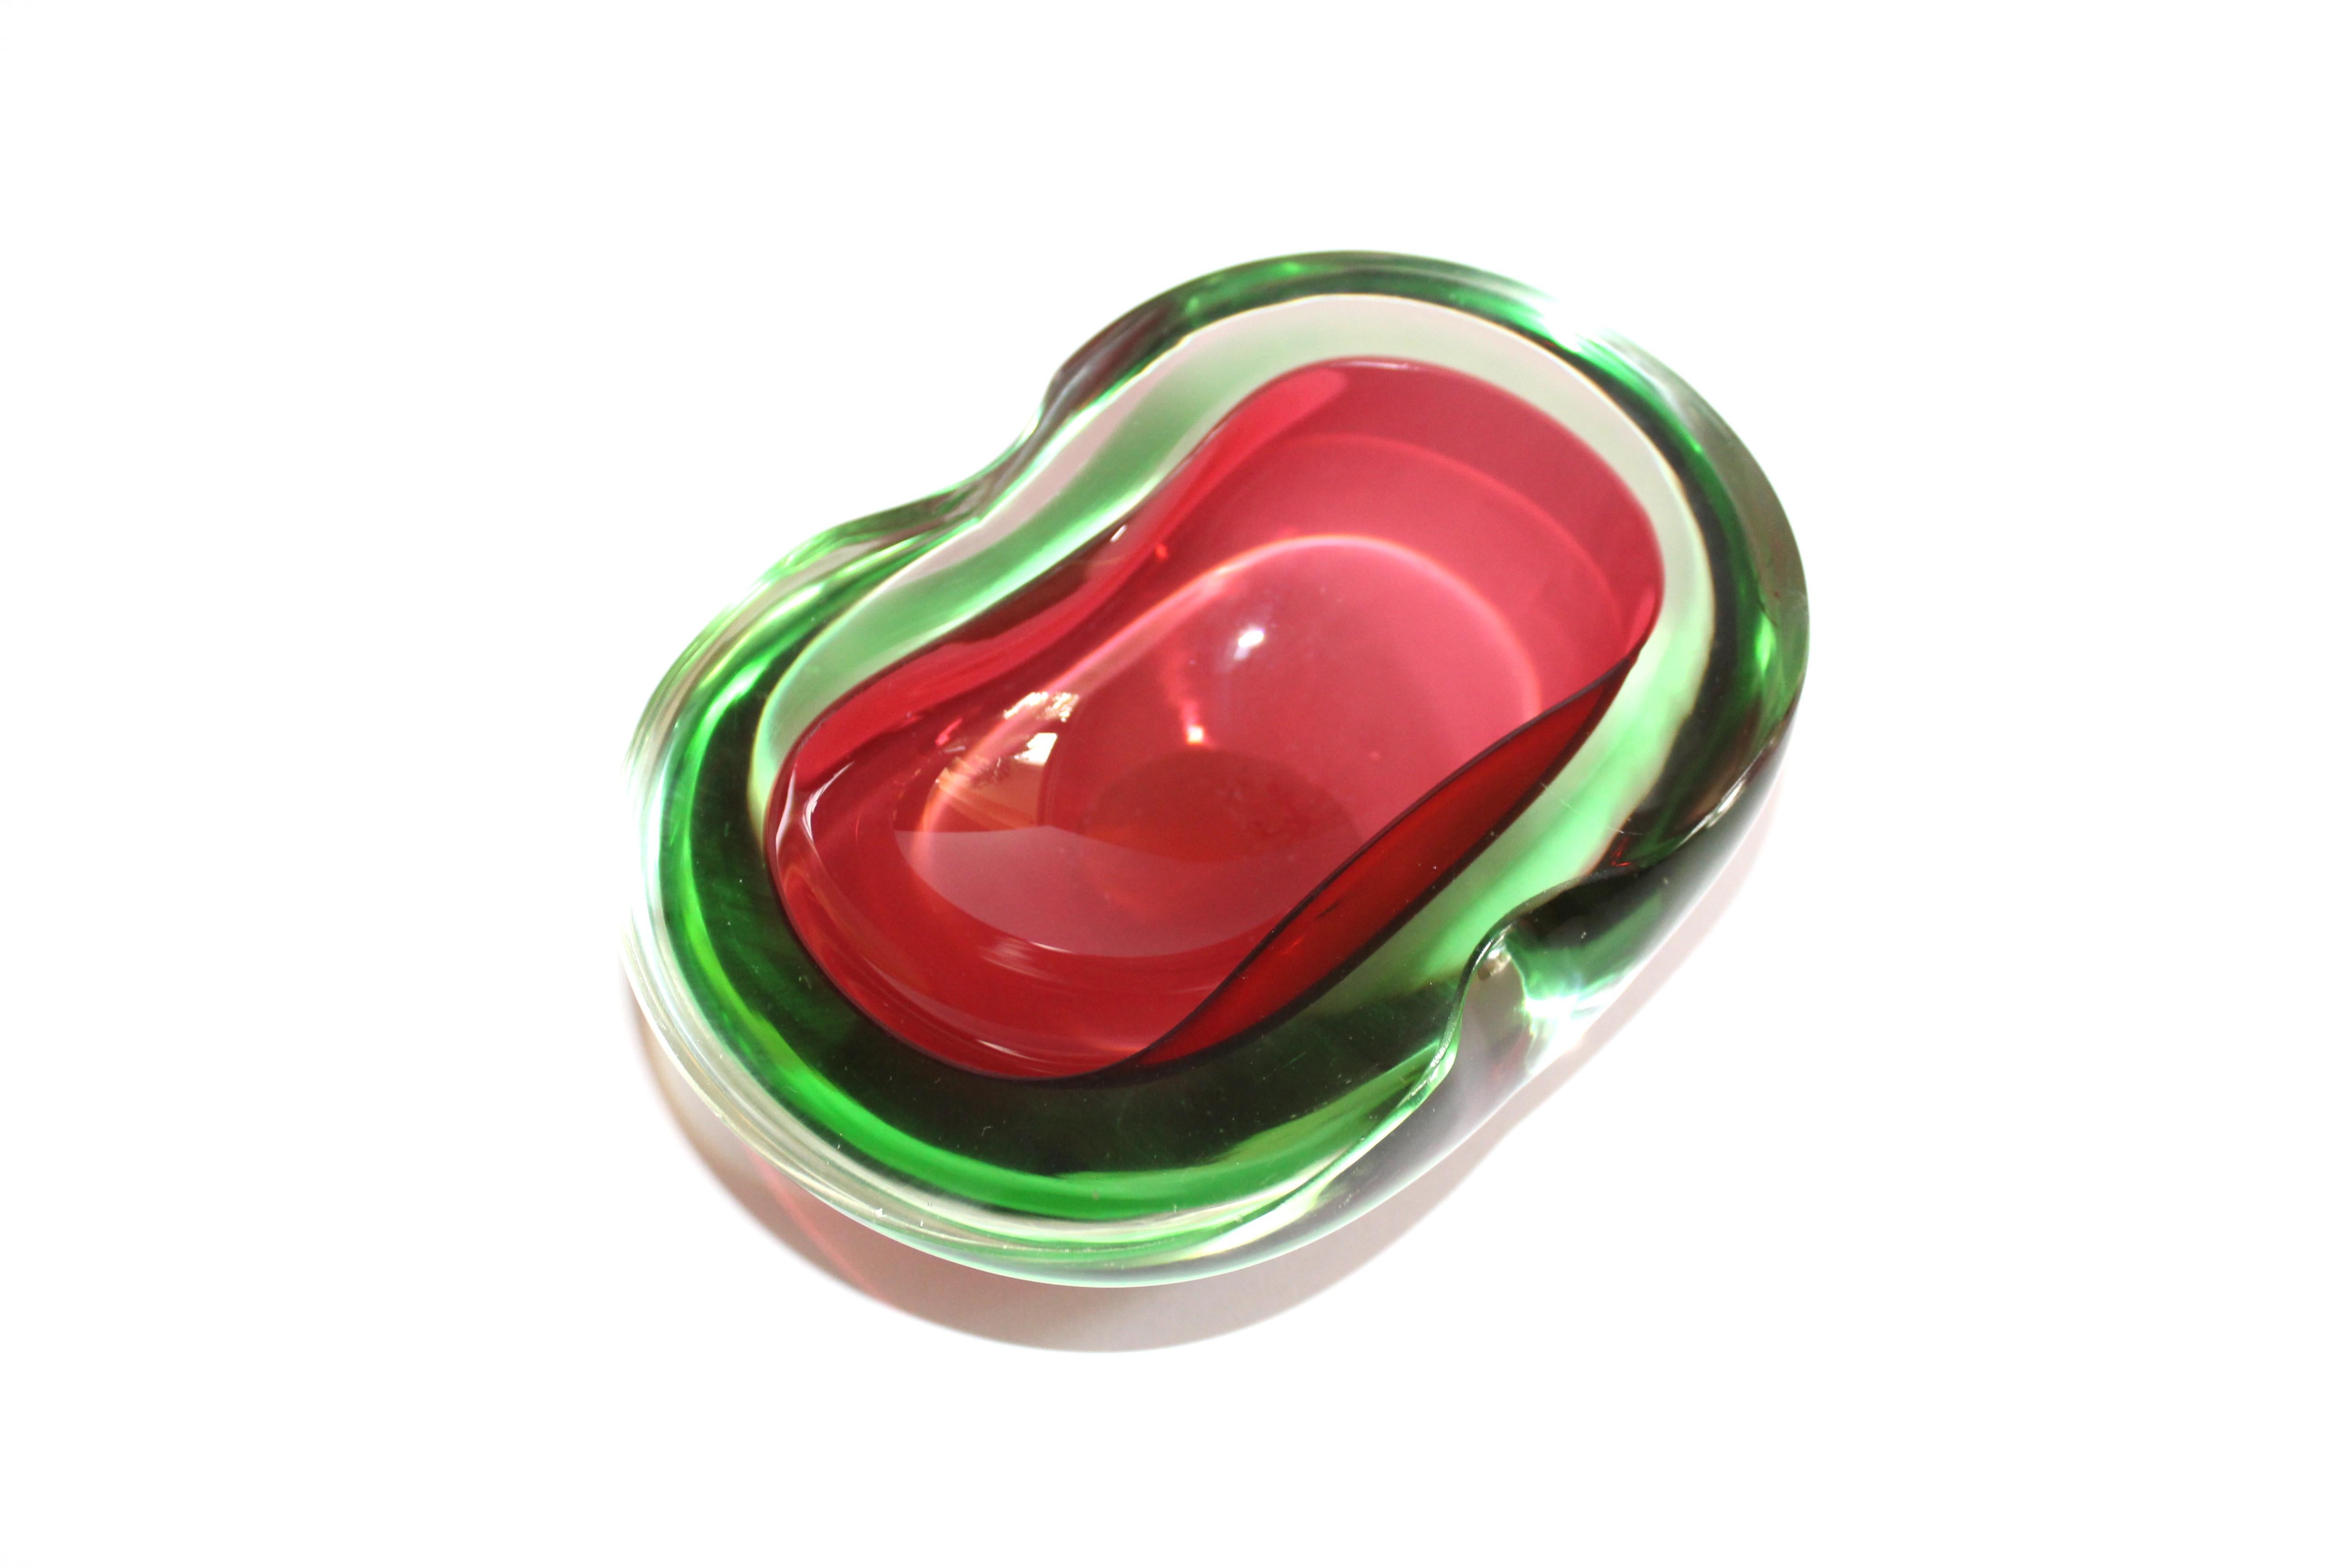 Art Glass Italian Mid-Century Modern Murano Glass Ashtray or Bowl in Red and Green